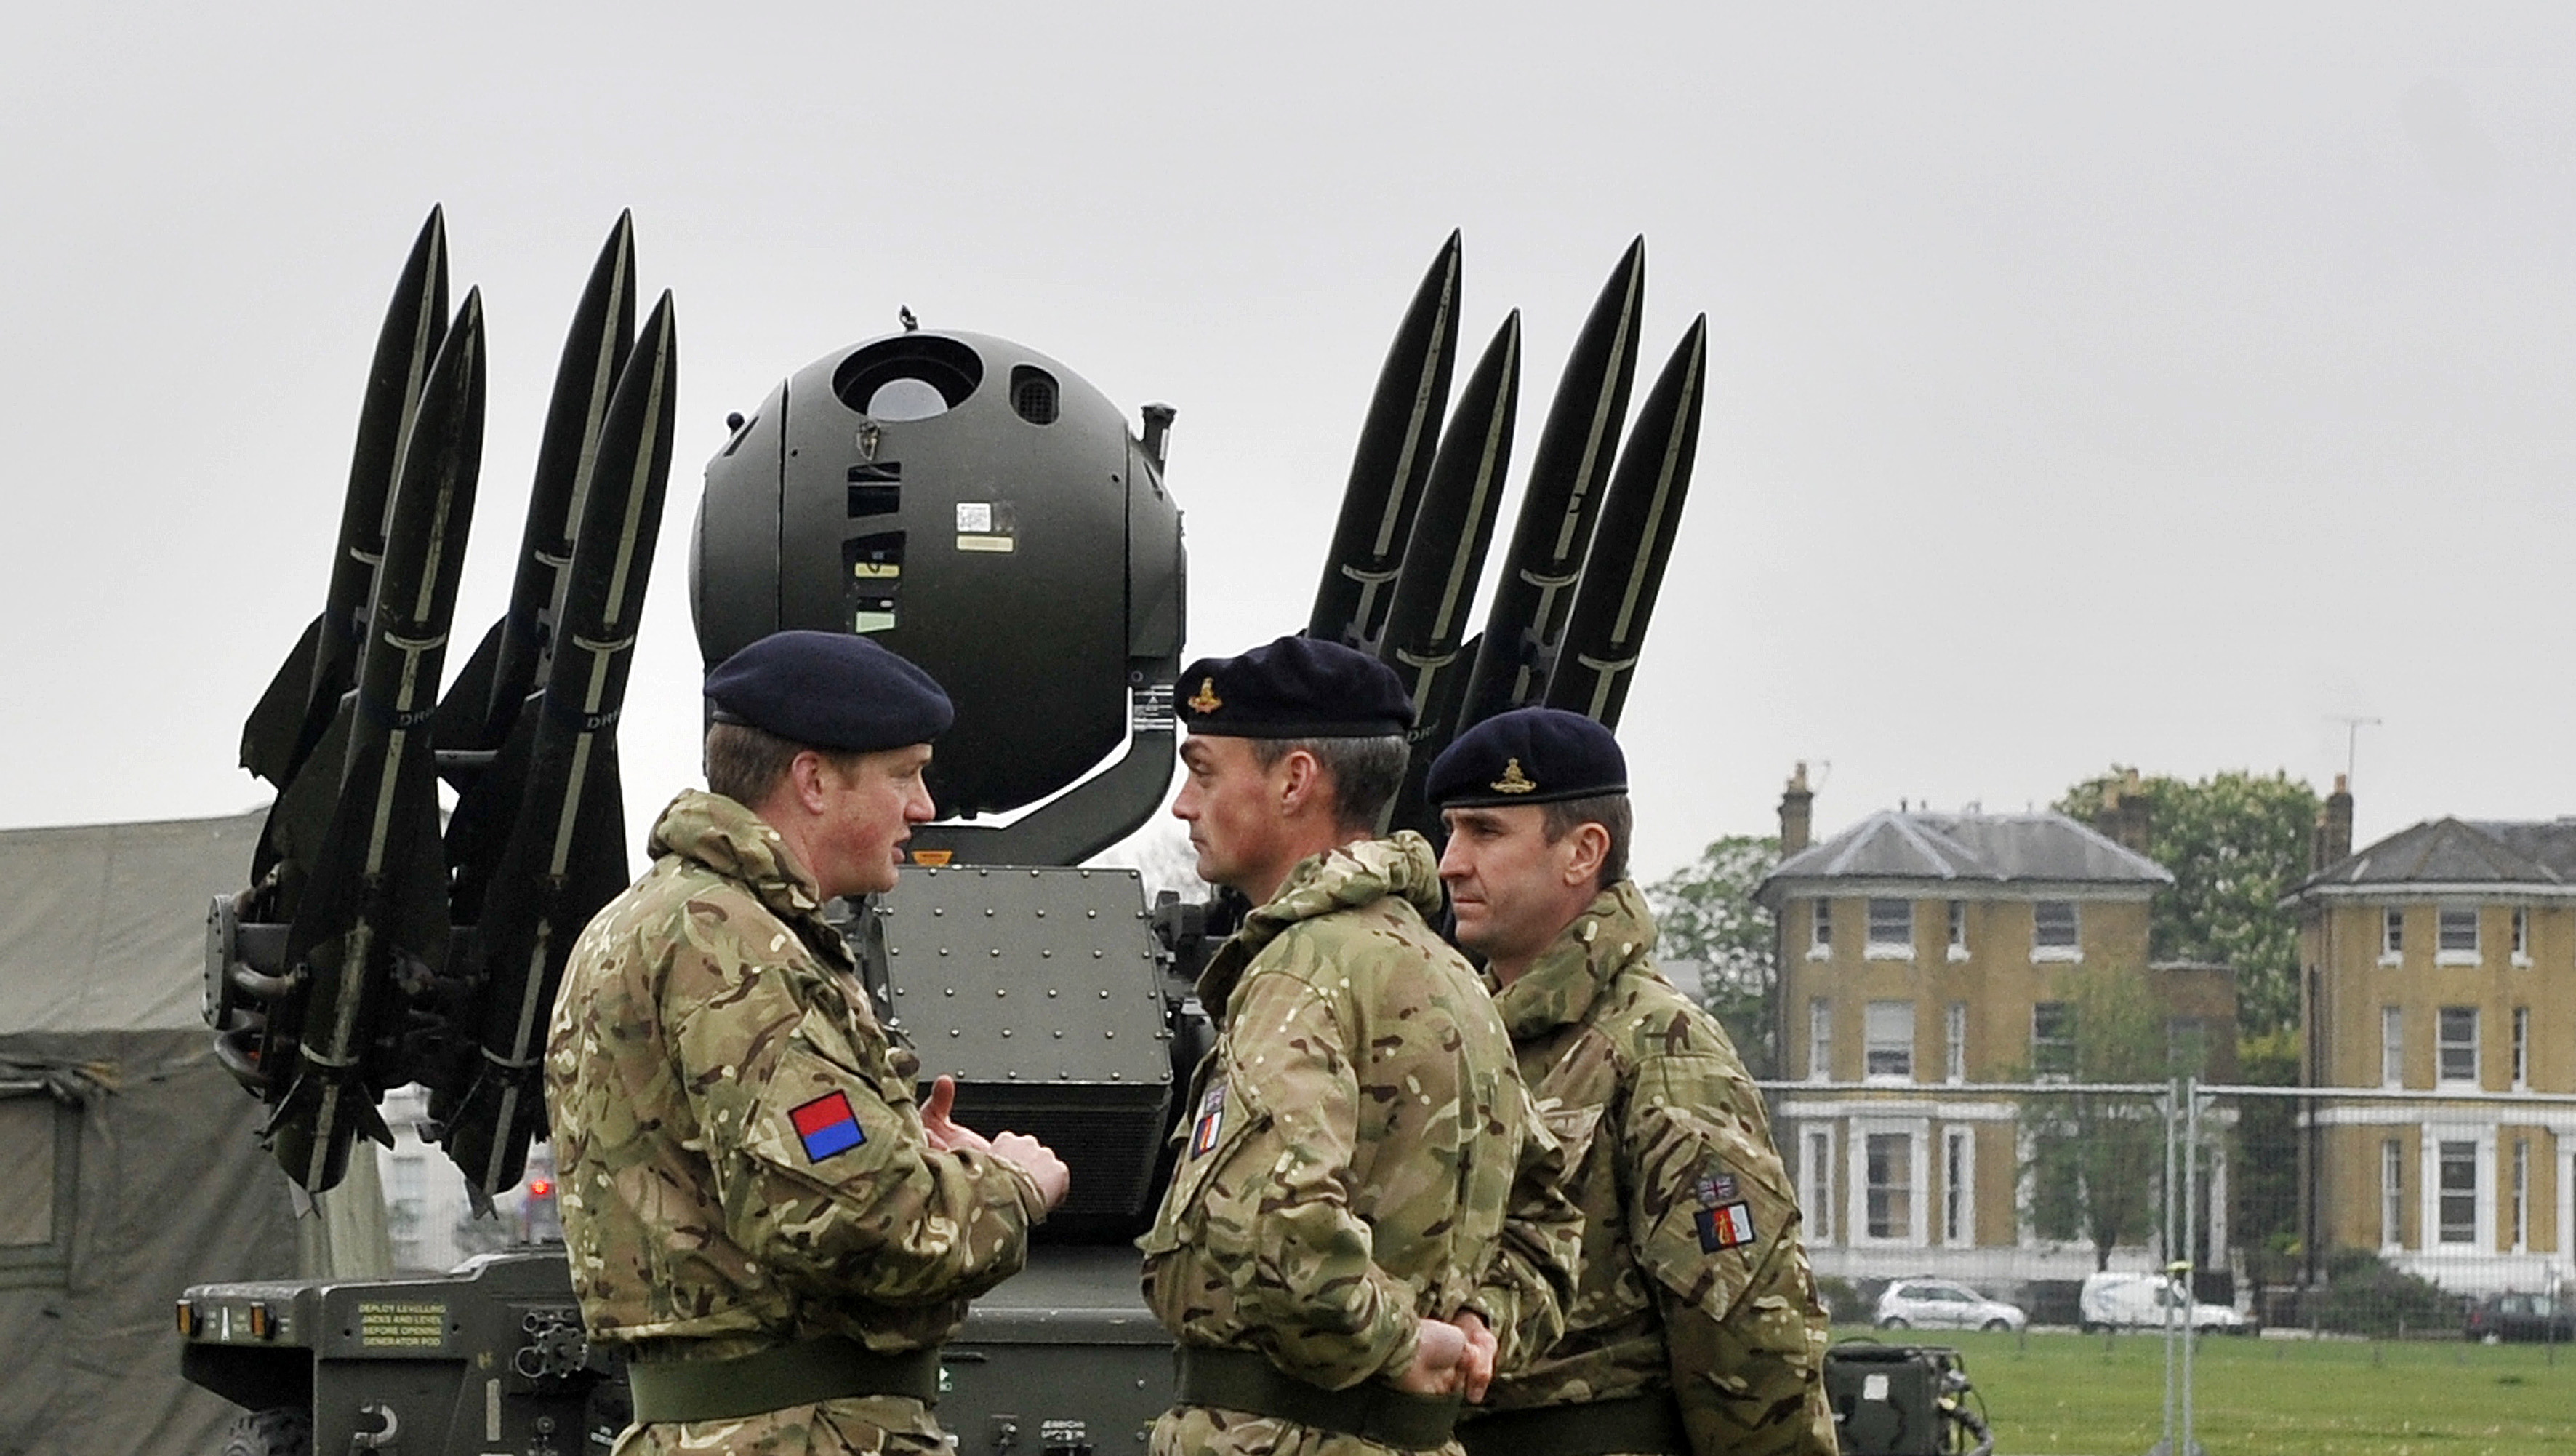 Surface to Air Missiles Deployed In London to secure Olympics